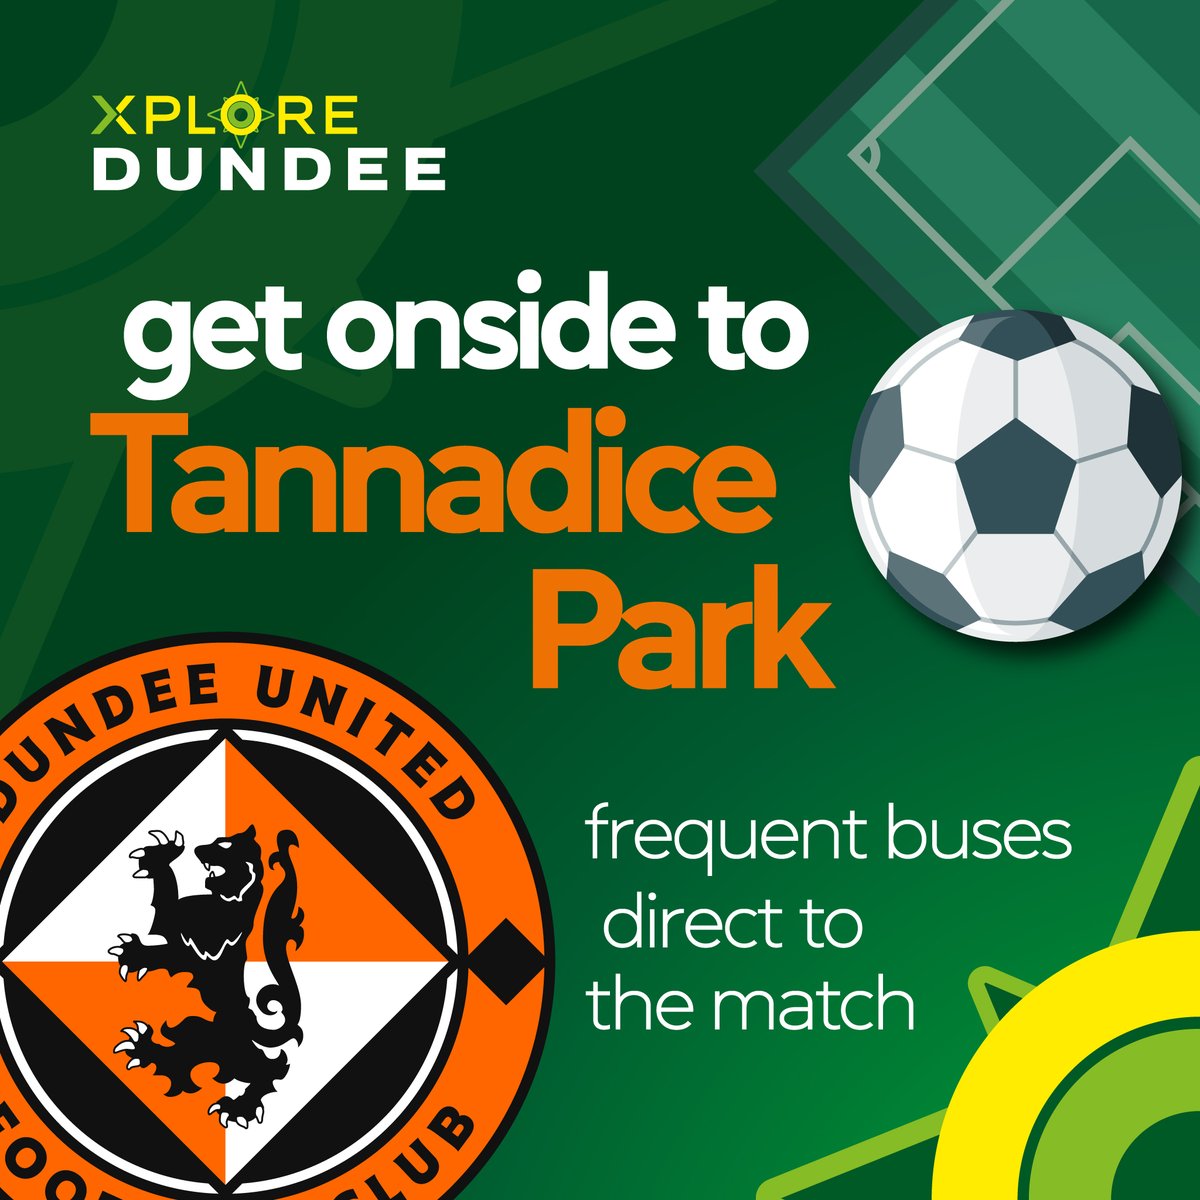 Are you heading to the @dundeeunitedfc game today?⚽ Why not take the bus? 🚌 The 1 & 18 both pass nearby Tannadice Park! Grab a DaySaver & travel on all our buses, all day for £4.40 Or, travel free with a N.E.C or @YoungScot 🙌 Plan your journey ➡️ ow.ly/EywY50Q34nM